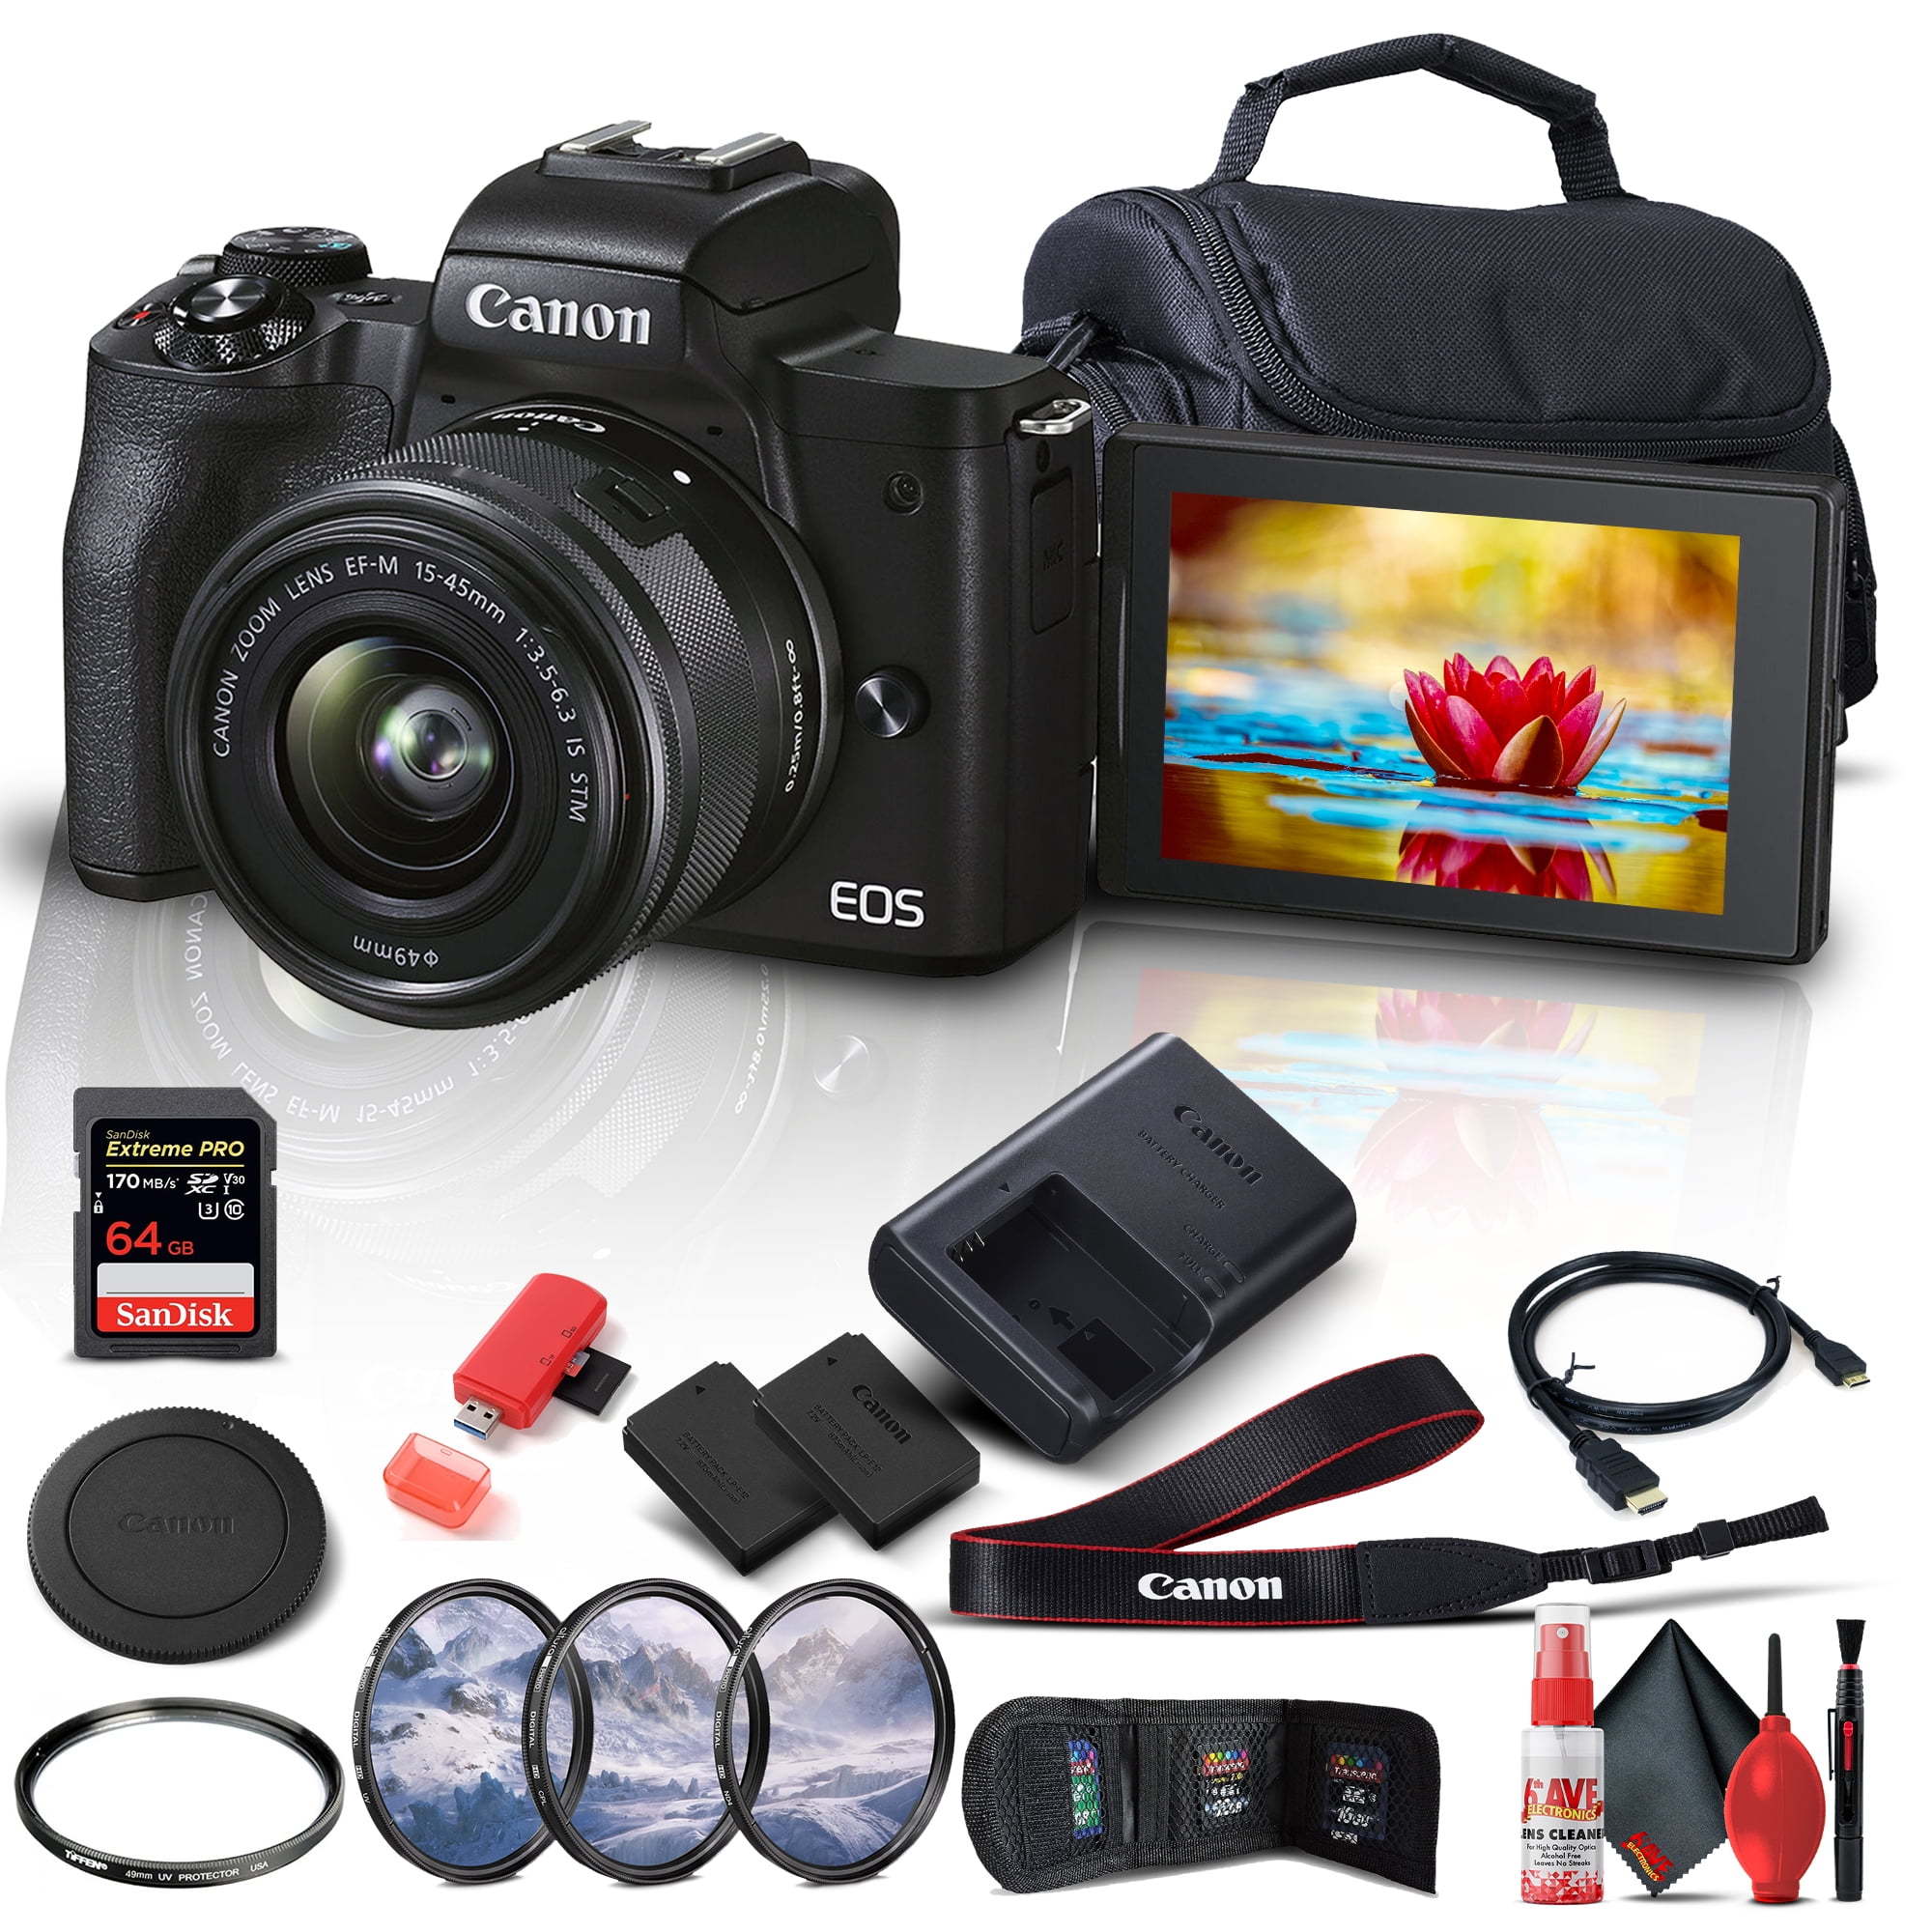 Canon EOS M50 Mark II Mirrorless Digital Camera with Lens (4728C006) + 64GB Extreme Card + Extra Battery + Case + UV + Card Reader + 3 Piece